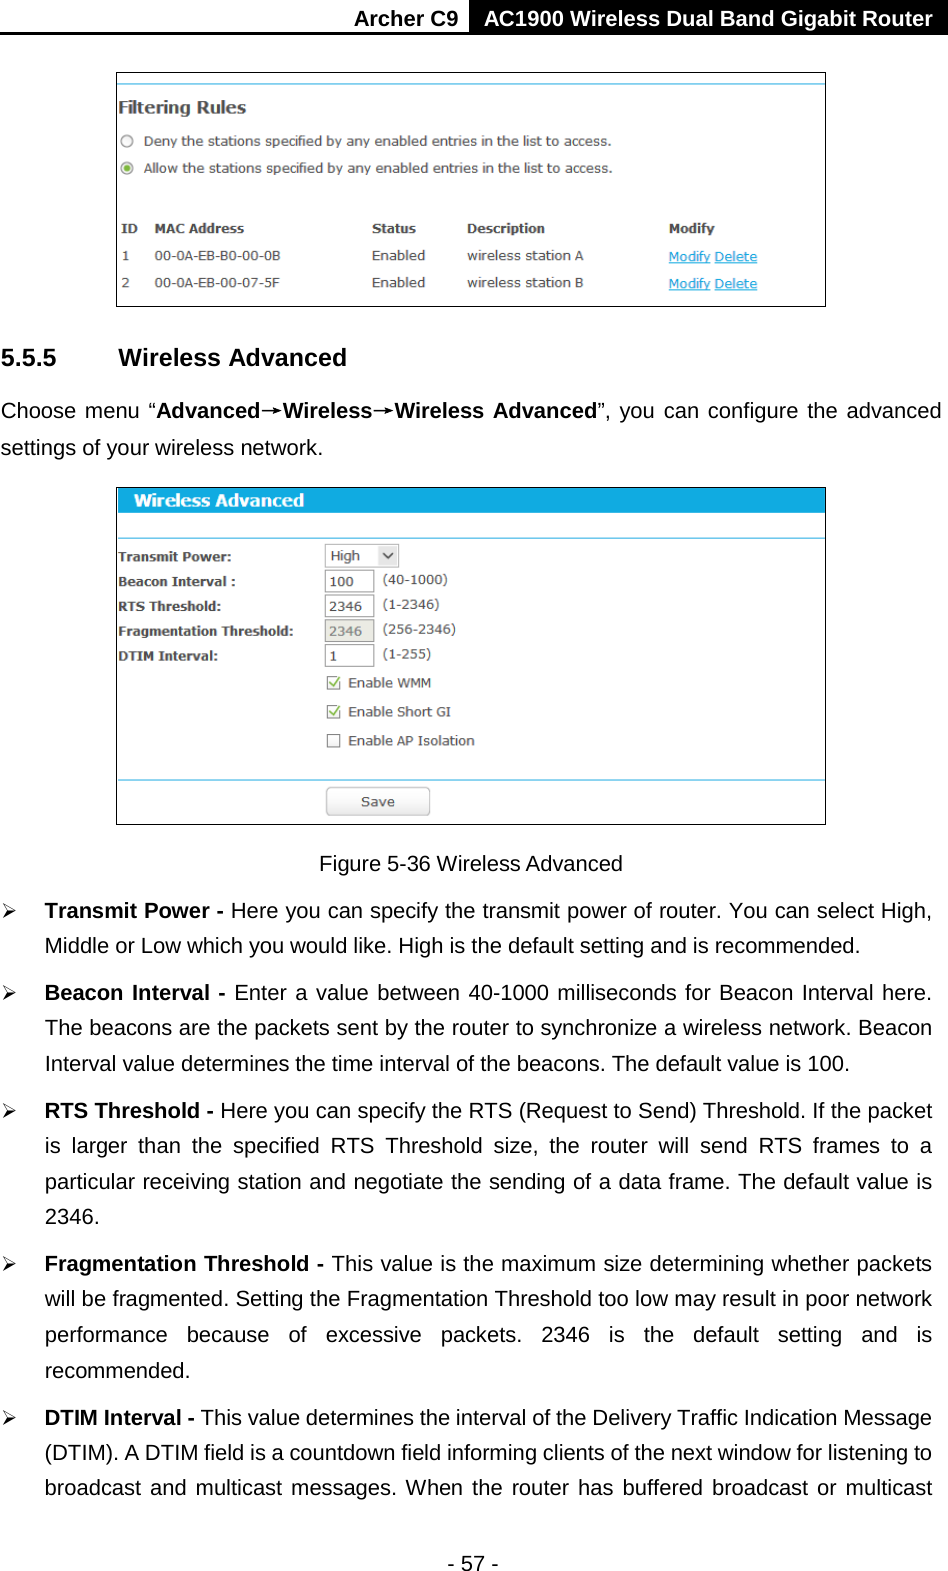 Archer C9 AC1900 Wireless Dual Band Gigabit Router   5.5.5 Wireless Advanced Choose menu “Advanced→Wireless→Wireless Advanced”, you can configure the advanced settings of your wireless network.  Figure 5-36 Wireless Advanced  Transmit Power - Here you can specify the transmit power of router. You can select High, Middle or Low which you would like. High is the default setting and is recommended.  Beacon Interval - Enter a value between 40-1000 milliseconds for Beacon Interval here. The beacons are the packets sent by the router to synchronize a wireless network. Beacon Interval value determines the time interval of the beacons. The default value is 100.    RTS Threshold - Here you can specify the RTS (Request to Send) Threshold. If the packet is larger than the specified RTS Threshold size, the router will send RTS frames to a particular receiving station and negotiate the sending of a data frame. The default value is 2346.    Fragmentation Threshold - This value is the maximum size determining whether packets will be fragmented. Setting the Fragmentation Threshold too low may result in poor network performance because of excessive packets. 2346 is the default setting and is recommended.    DTIM Interval - This value determines the interval of the Delivery Traffic Indication Message (DTIM). A DTIM field is a countdown field informing clients of the next window for listening to broadcast and multicast messages. When the router has buffered broadcast or multicast - 57 - 